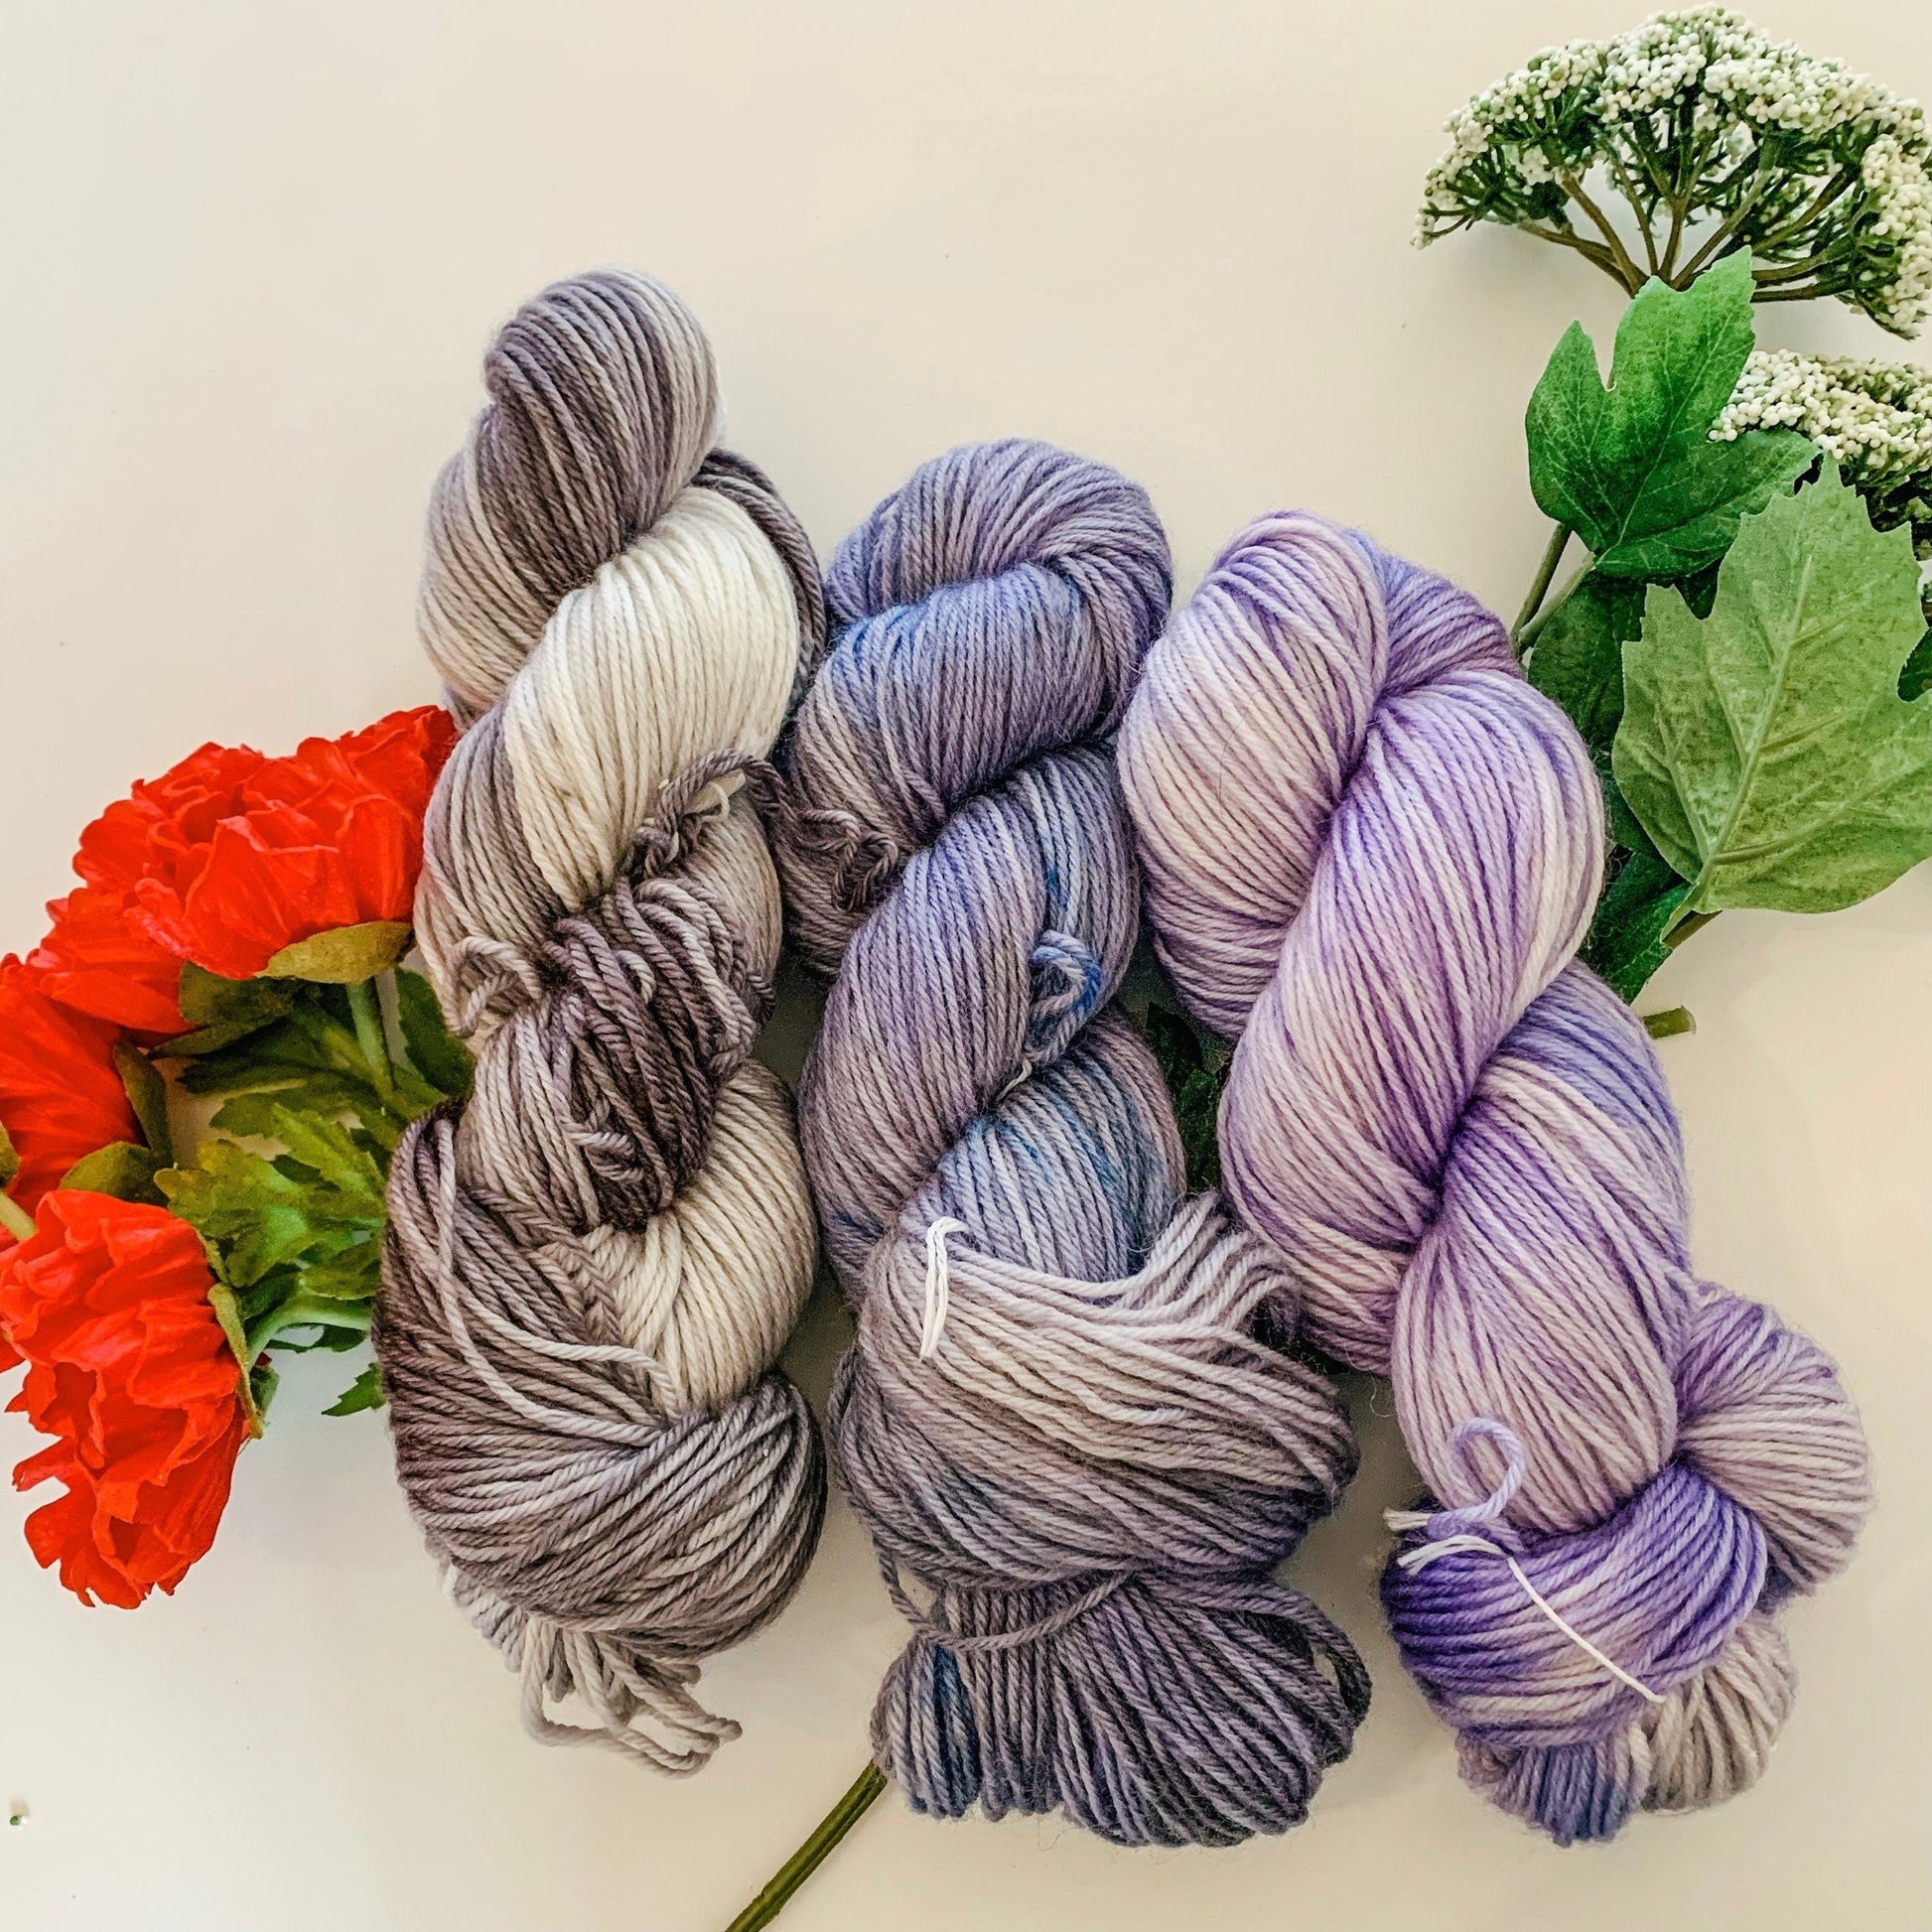 Three cool-toned skeins of yarn from the Poppy collection with poppy and Queen Anne's Lace faux flowers.